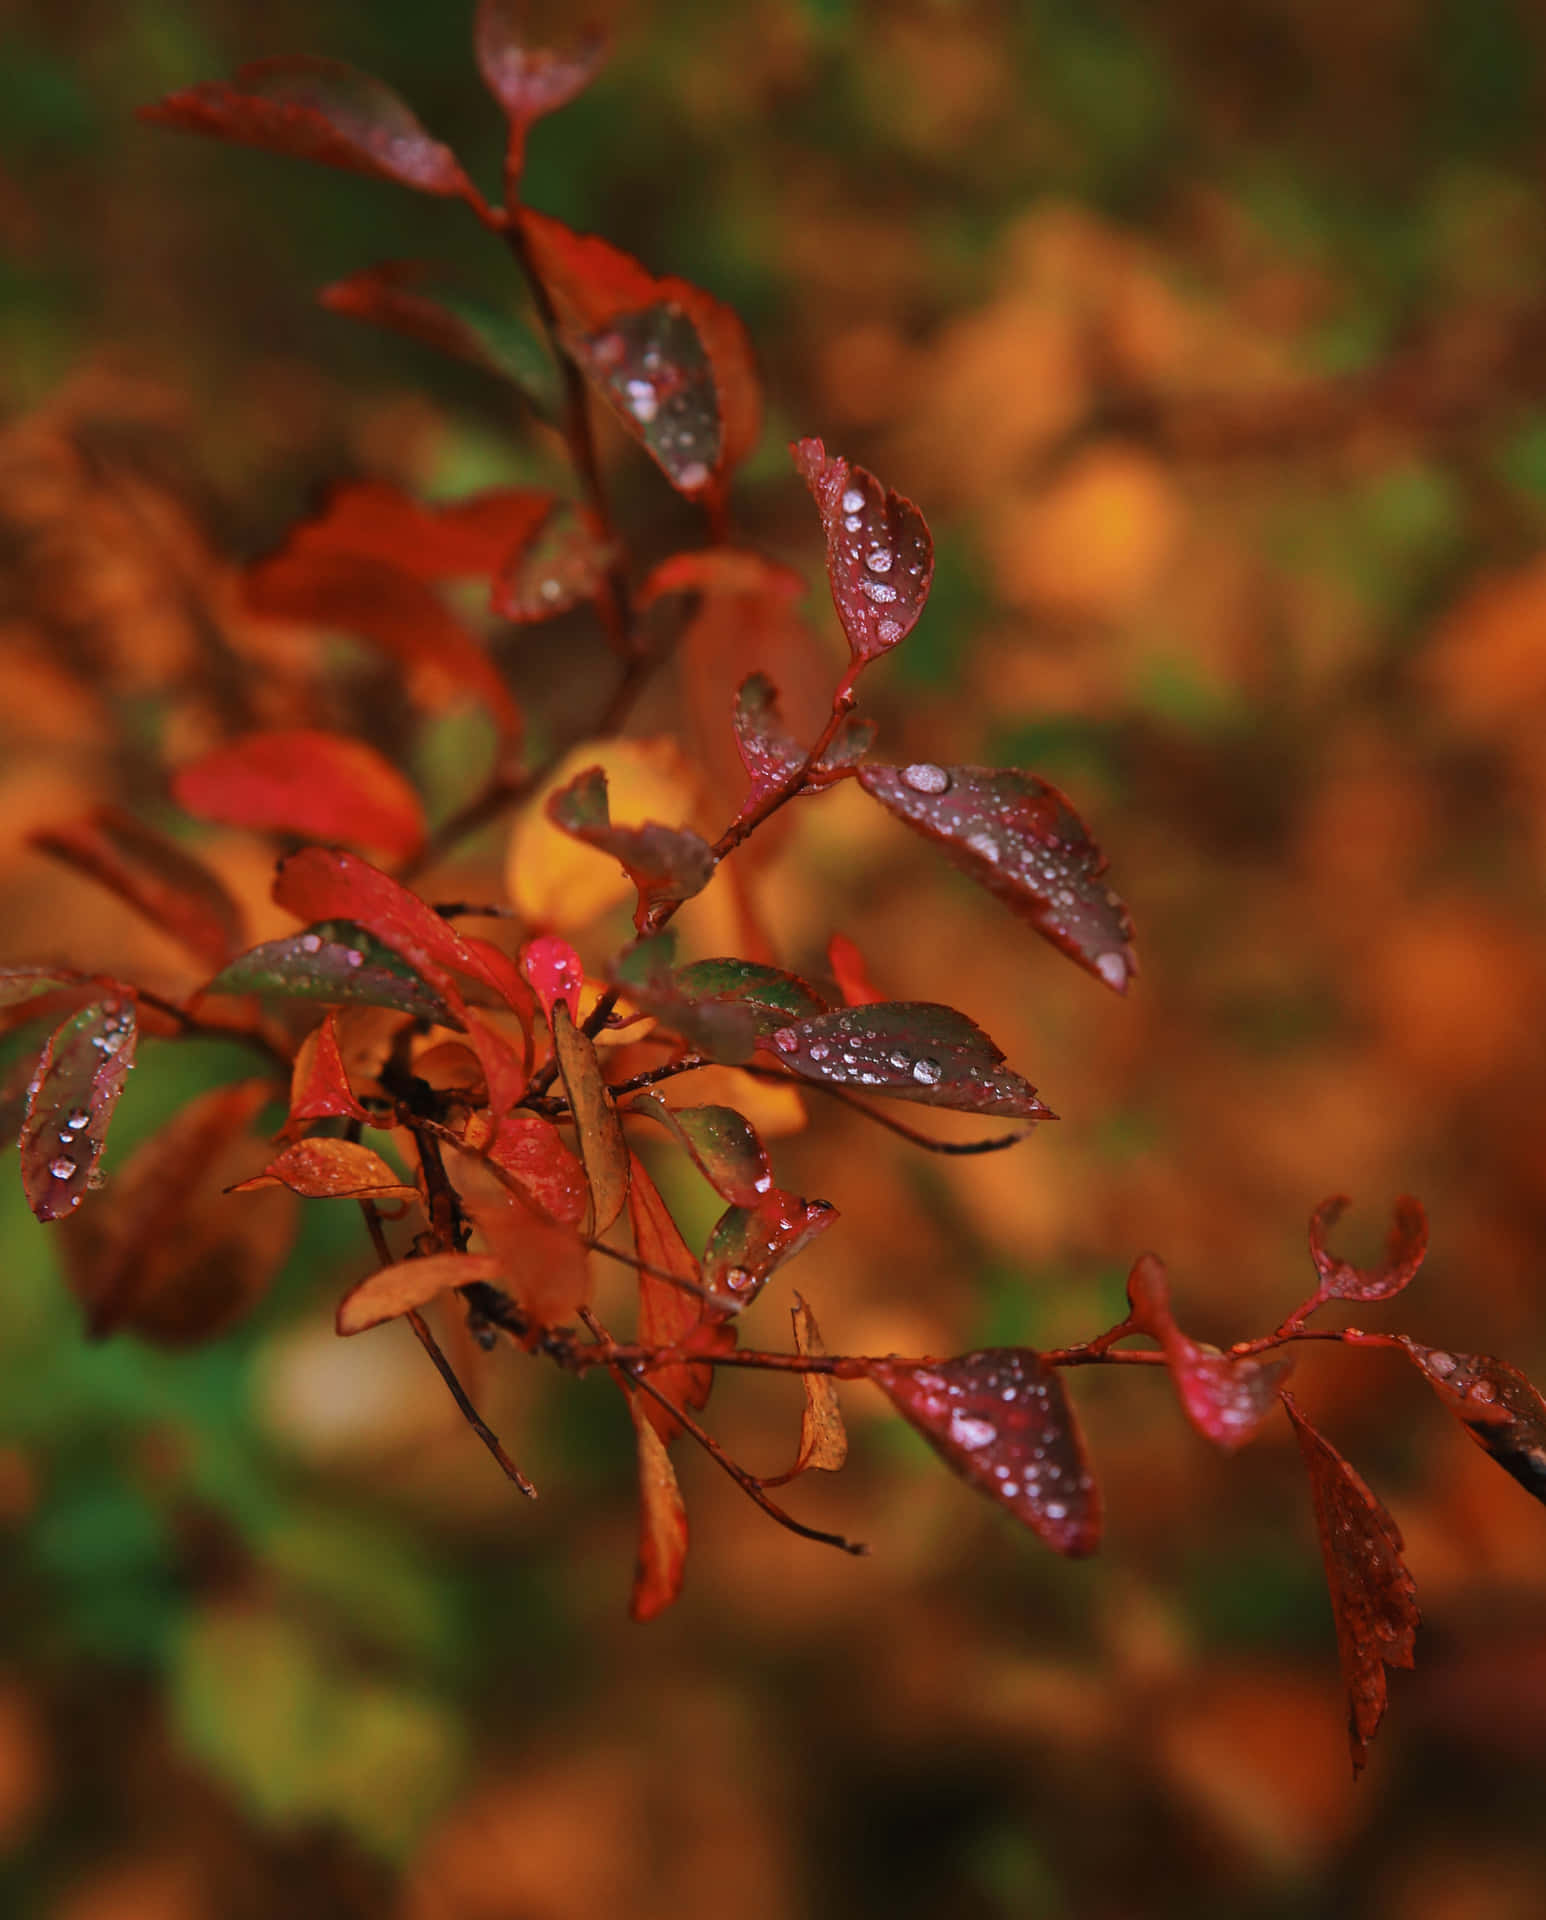 Caption: Refreshing Fall Dew on Colorful Leaves Wallpaper